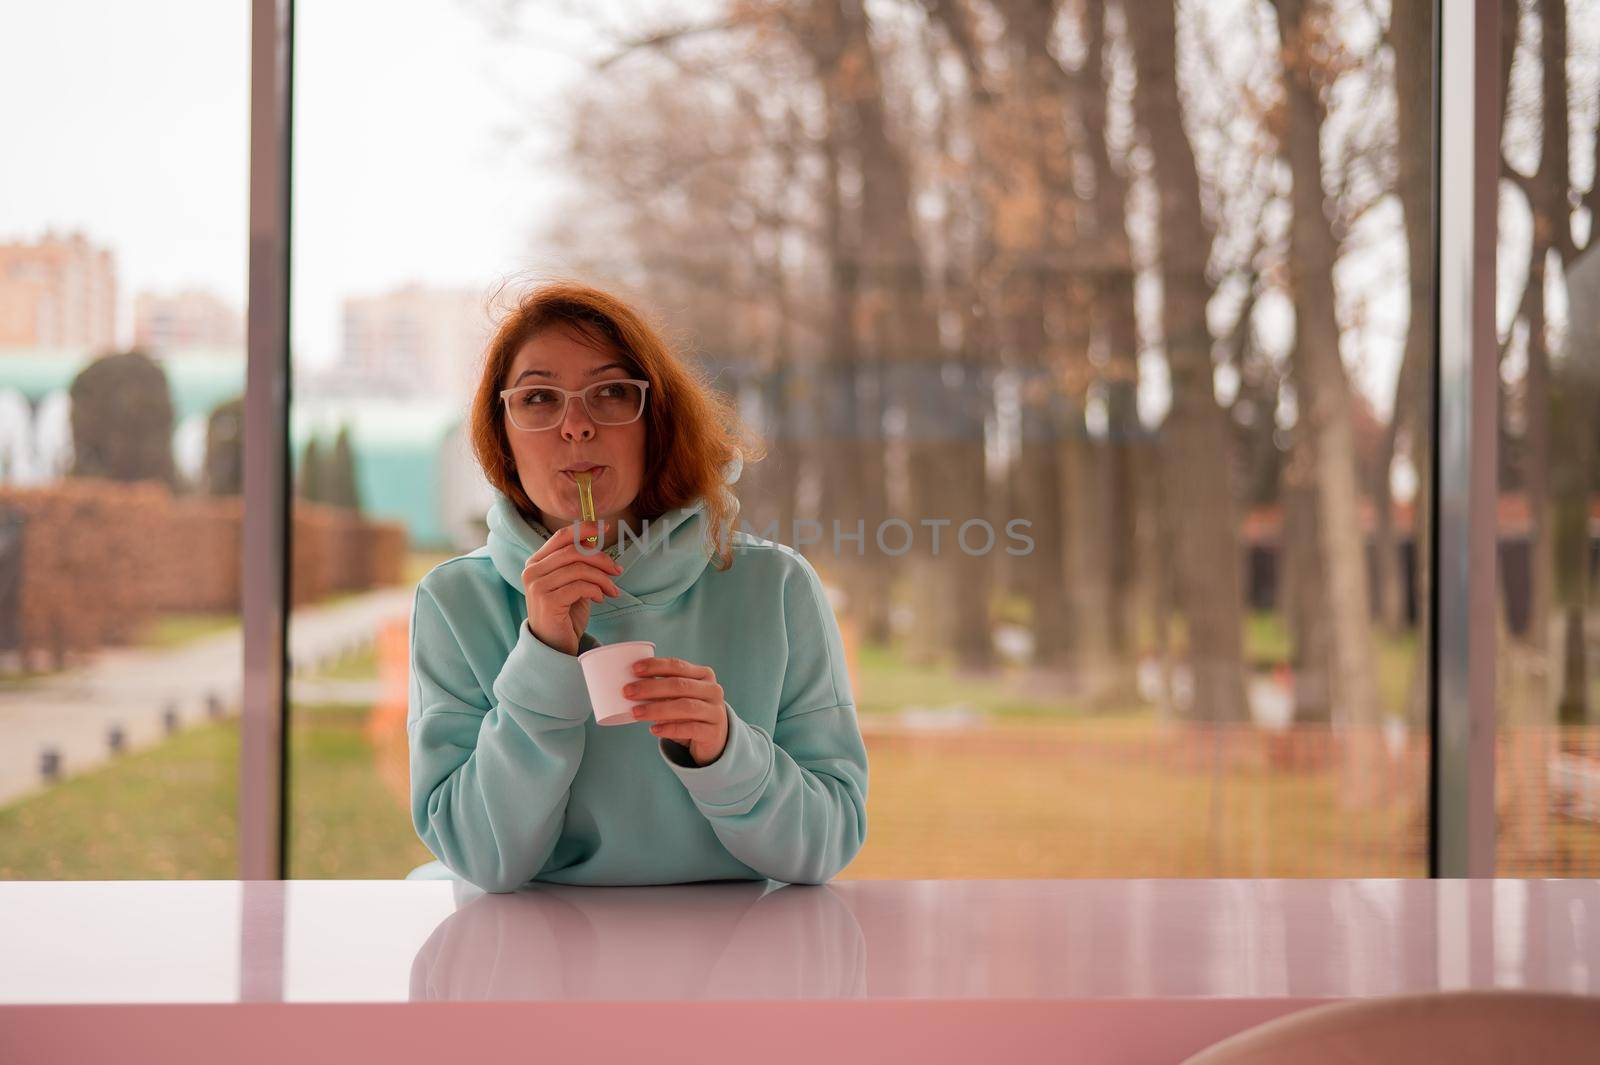 Caucasian red-haired woman eats ice cream with a plastic spoon while sitting alone in a cafe